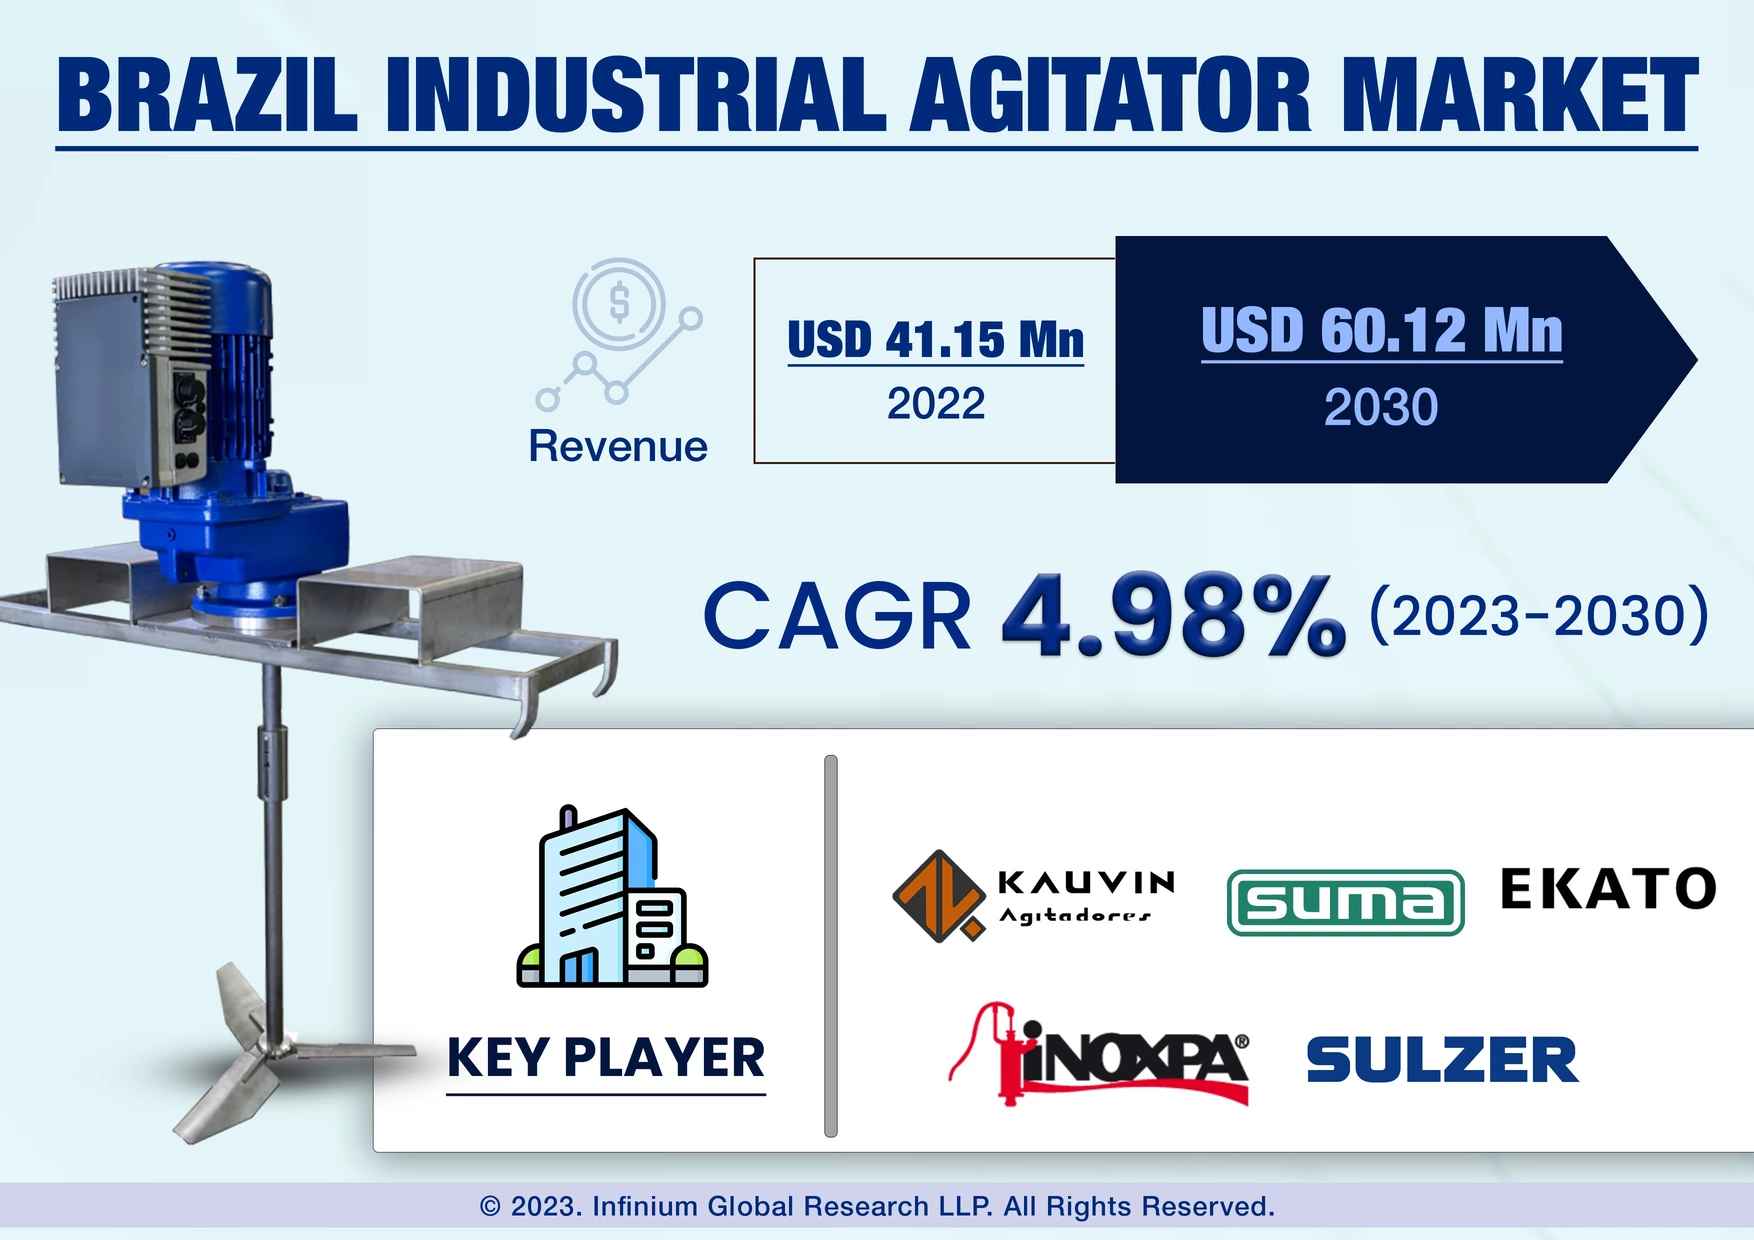 Brazil Industrial Agitator Market was Valued at USD 41.15 Million in 2022 and is Expected to Reach USD 60.12 Million by 2030 and Grow at a CAGR of 4.98% Over the Forecast Period.